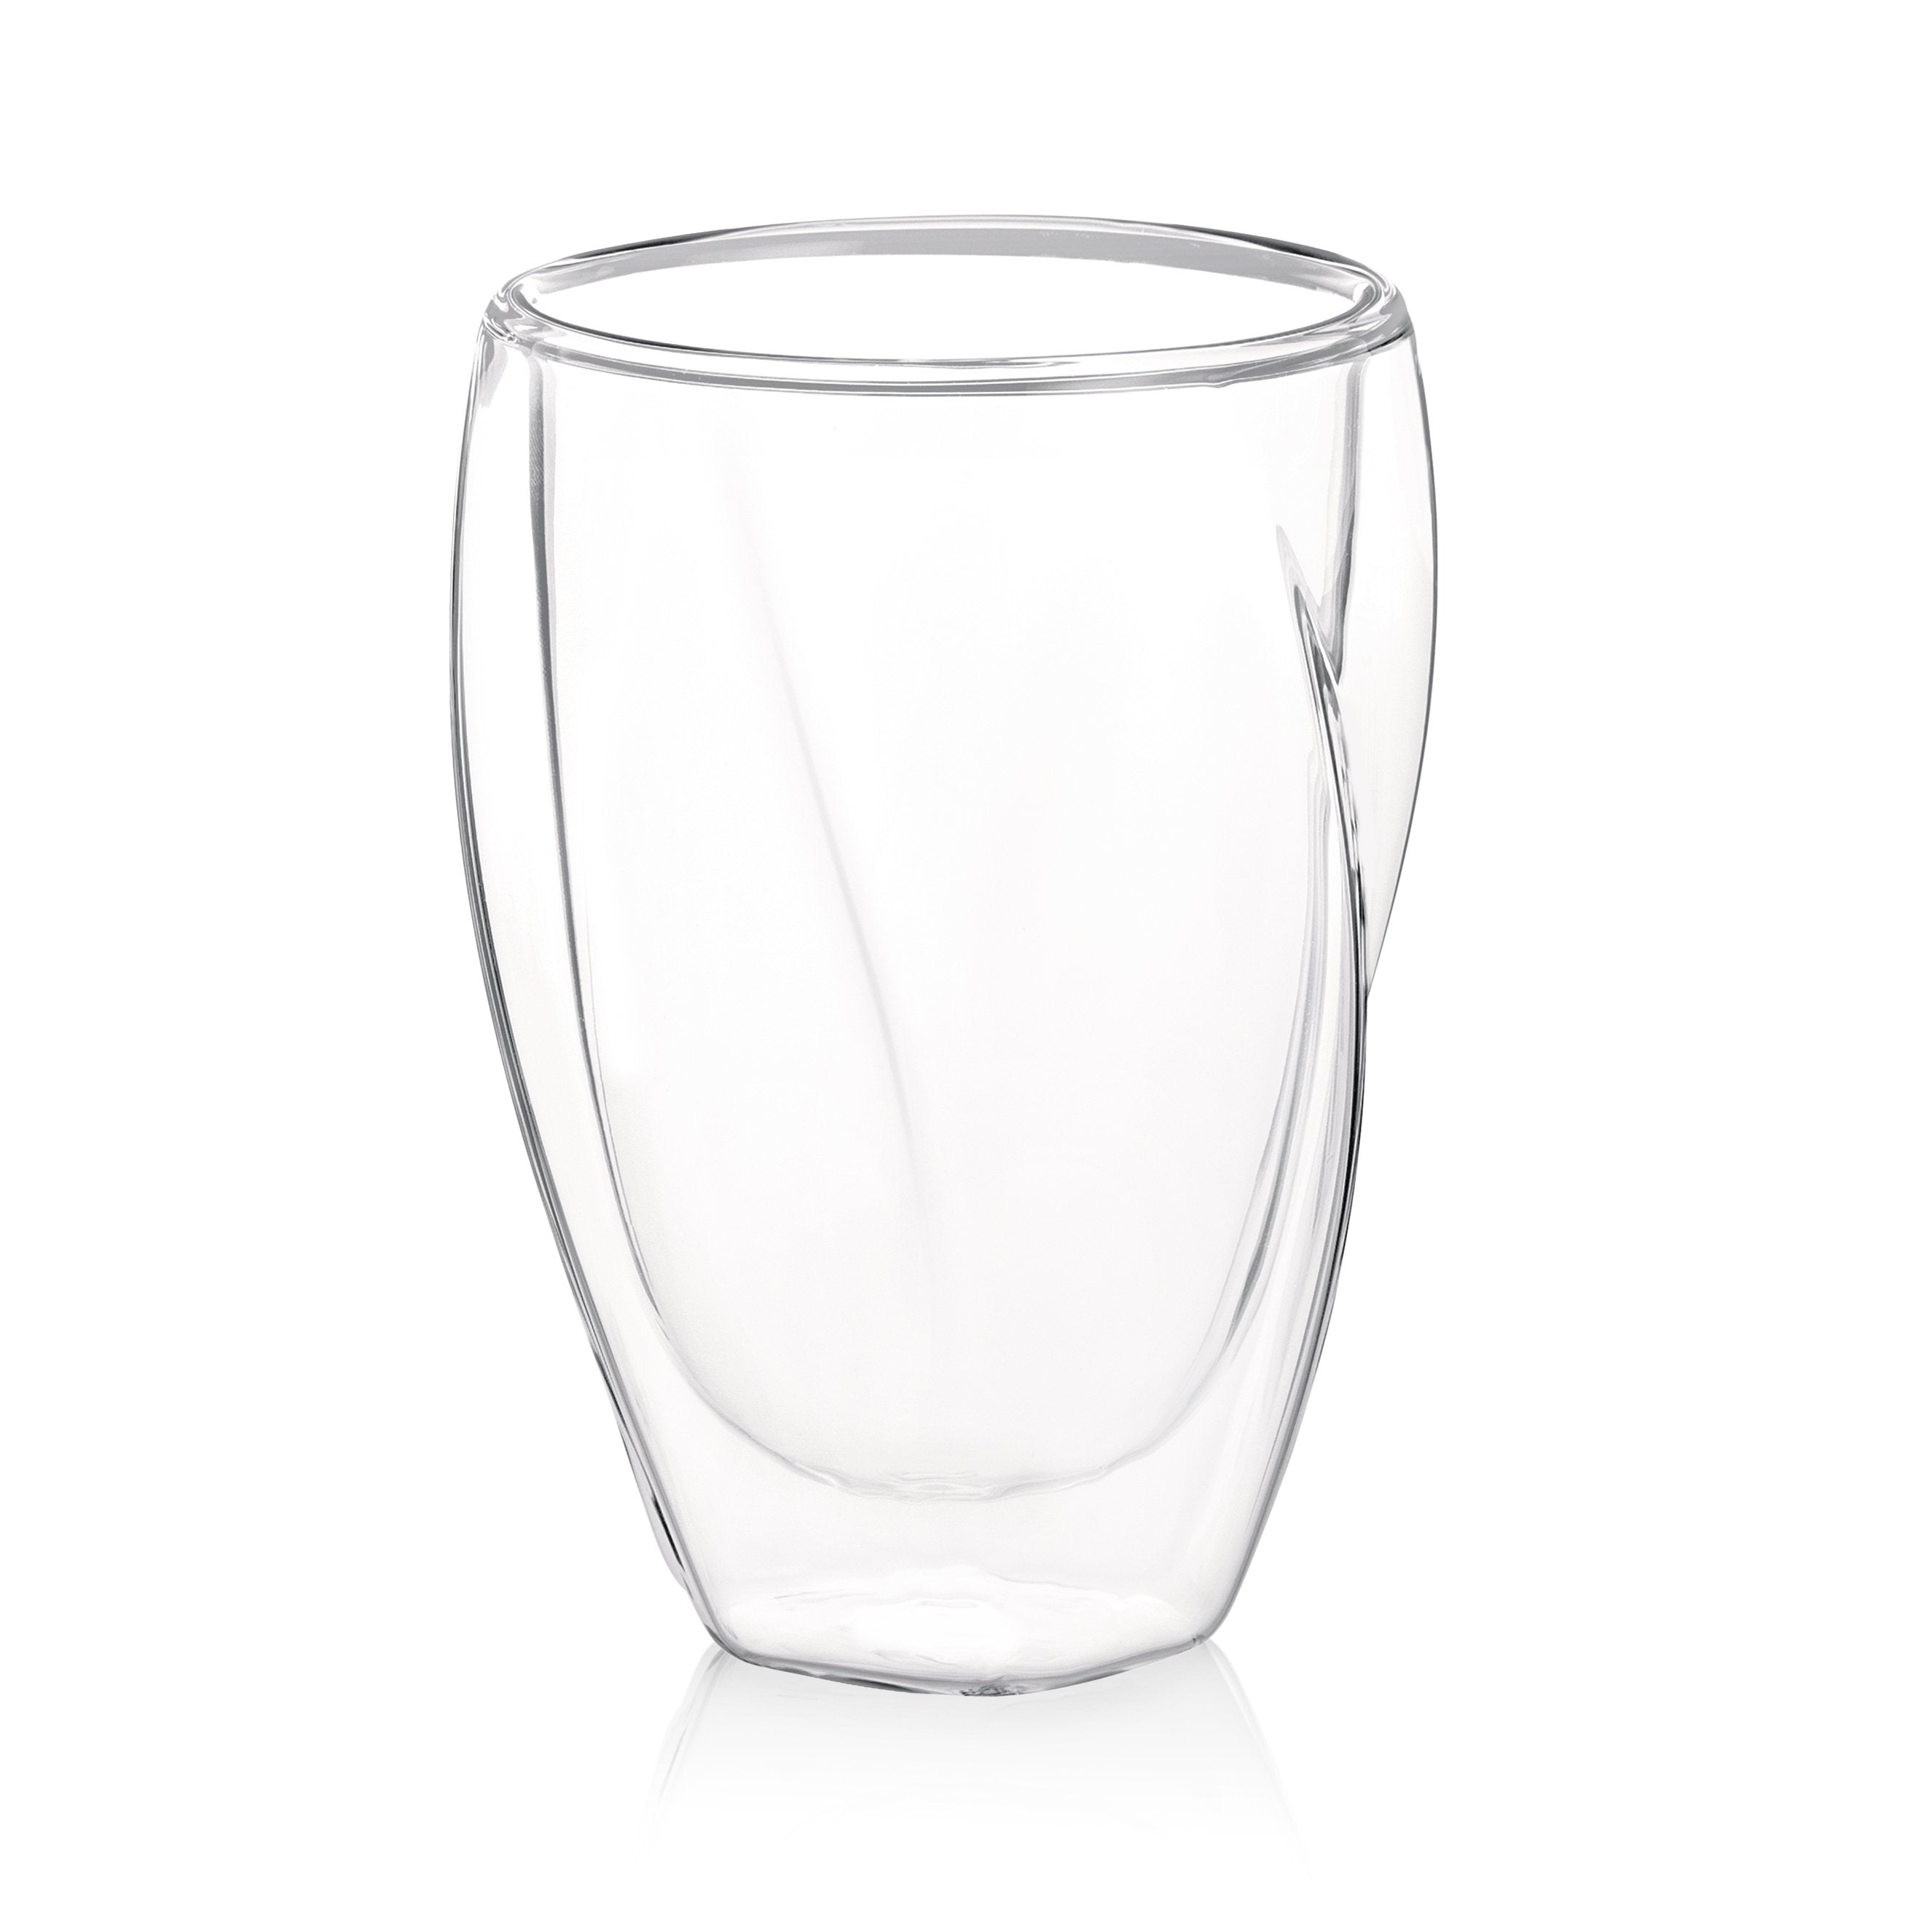 Lacey Double Wall Insulated 10 oz Glasses